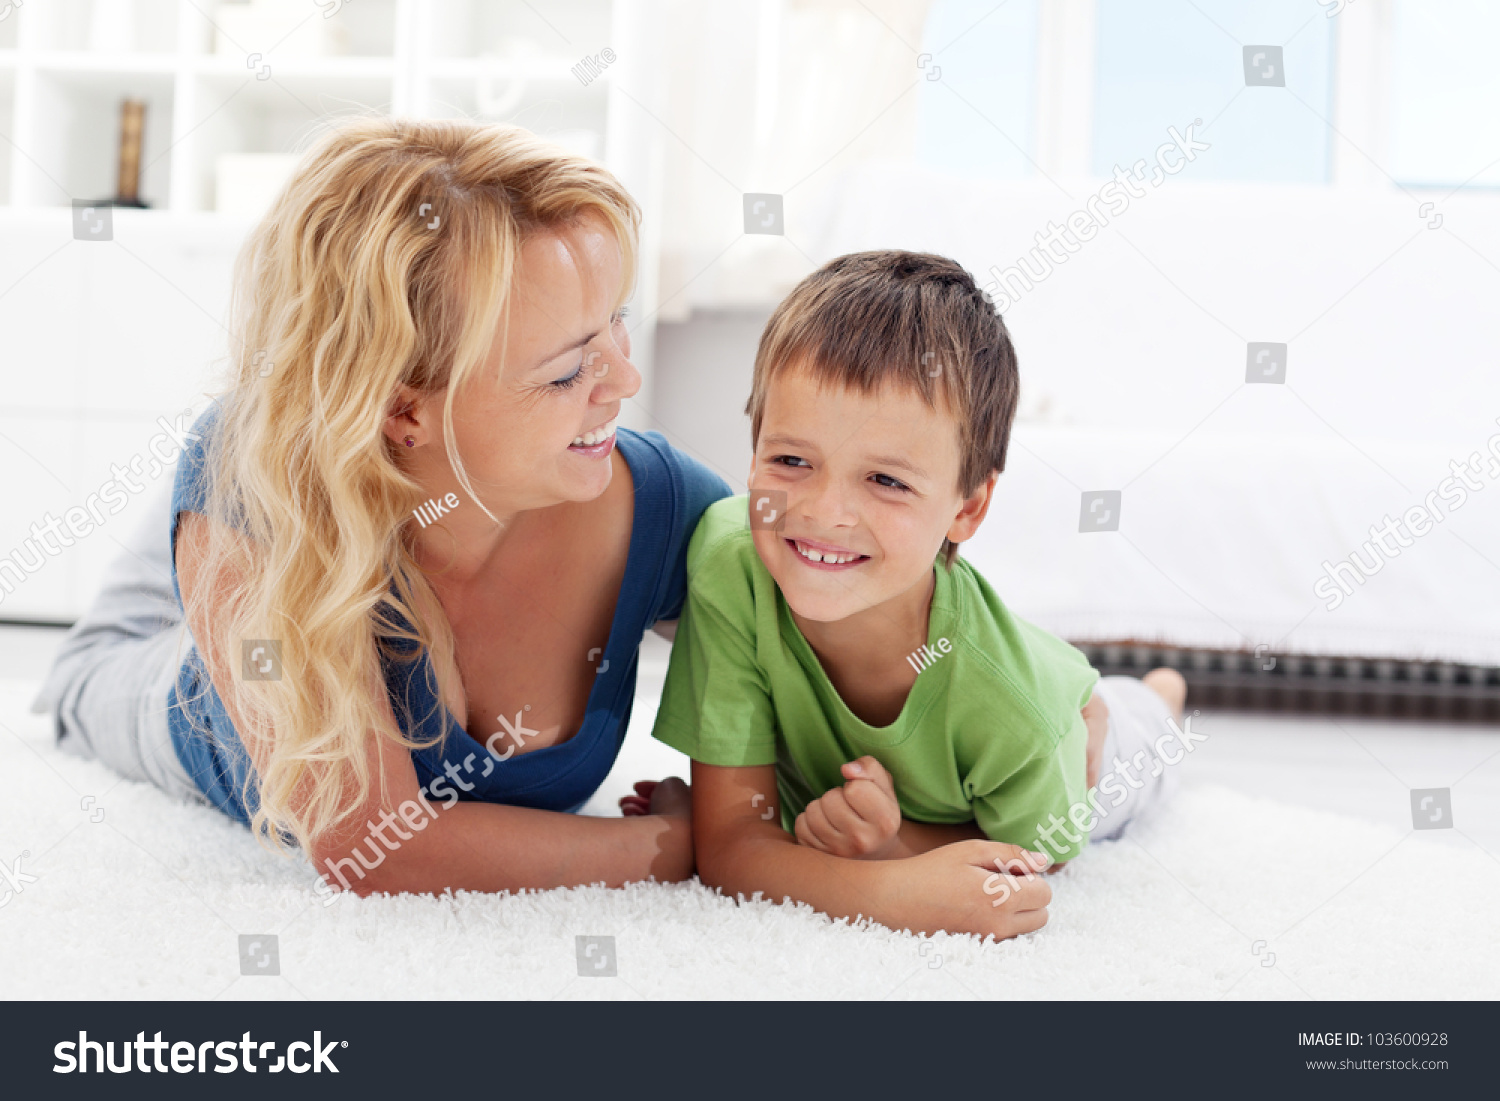 Happy morning - boy playing with mother on the sunlit floor #103600928